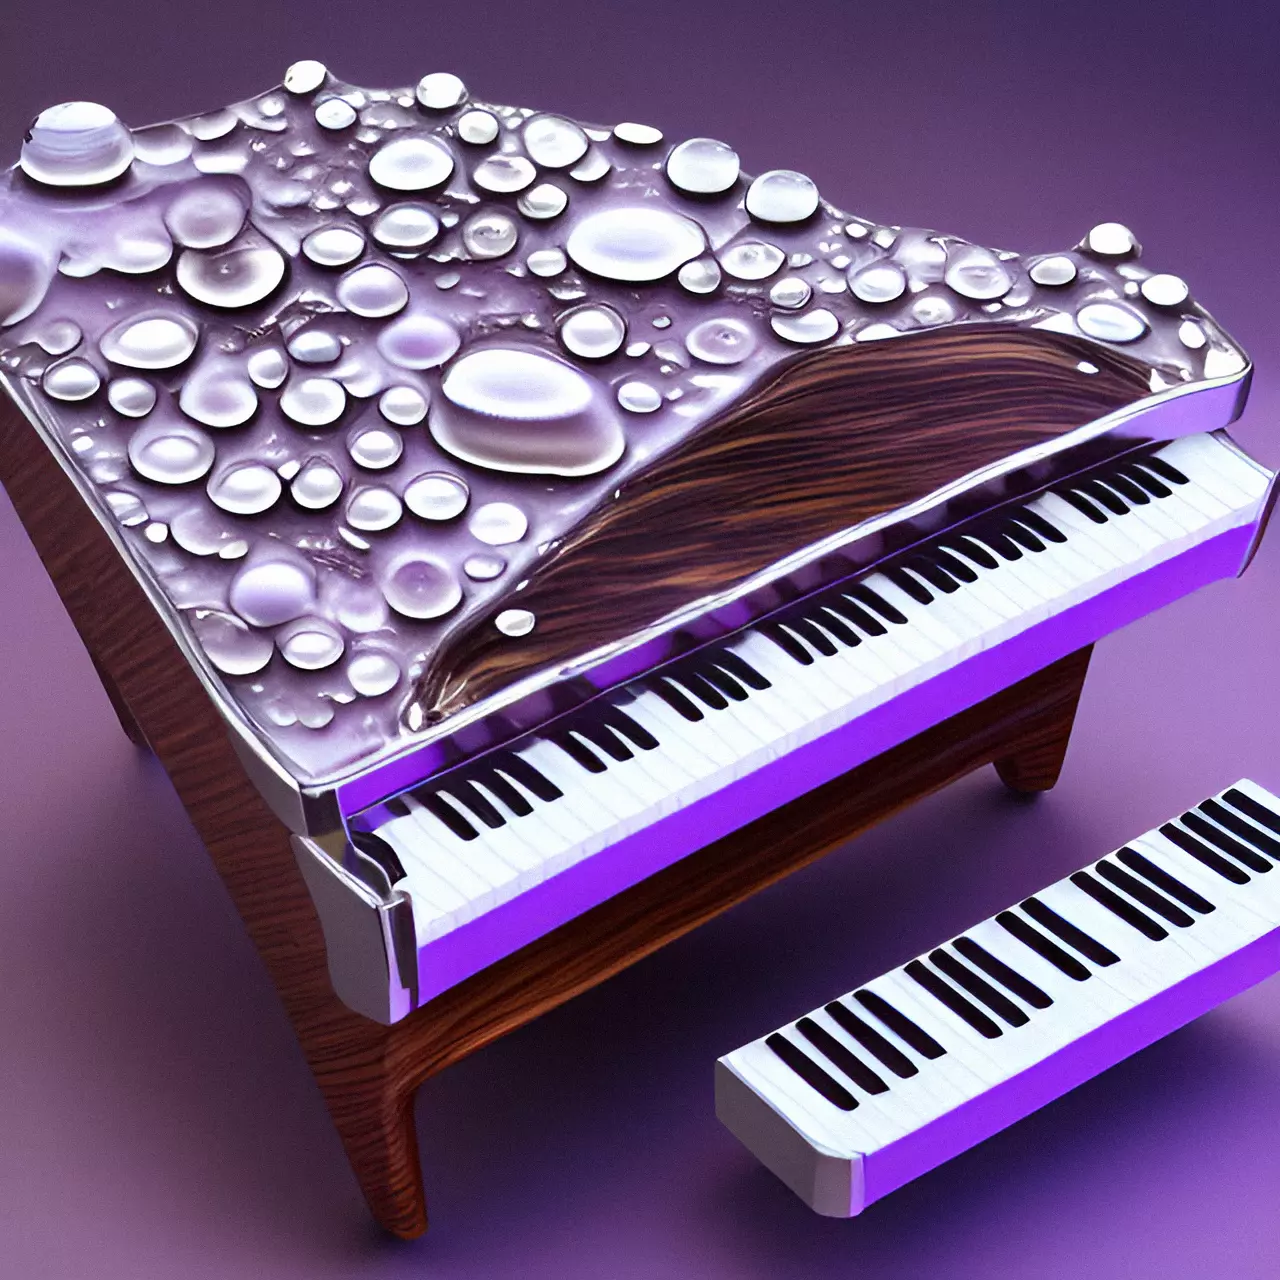 Surreal Musical Instruments